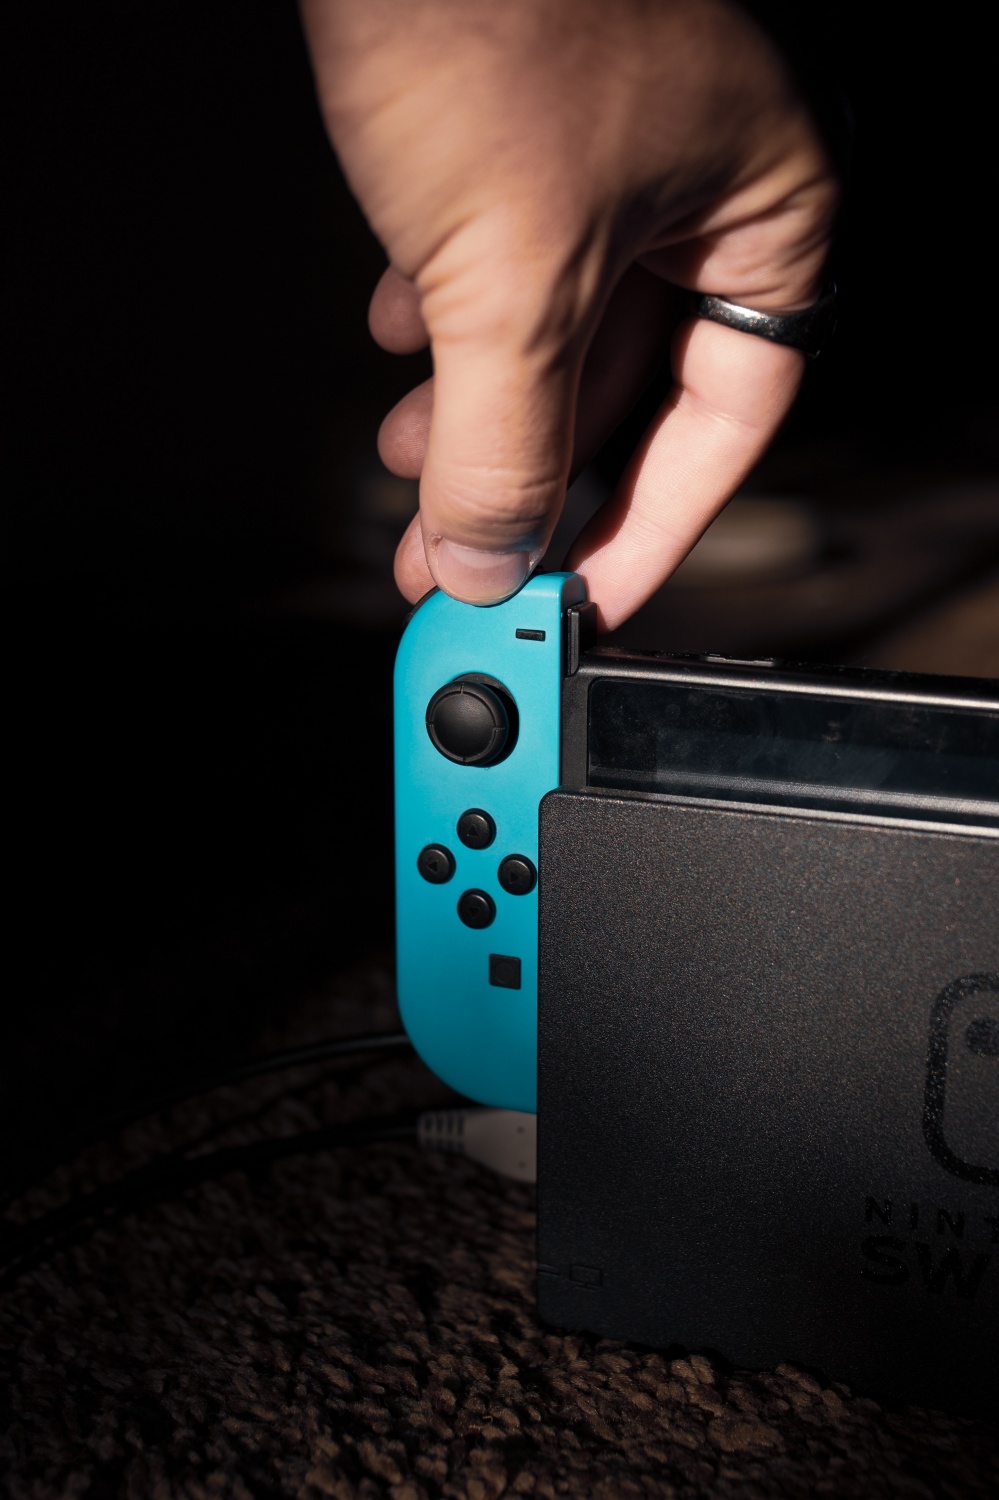 Nintendo Switch Features, Leaks, Release Date, and Rumors For 2021